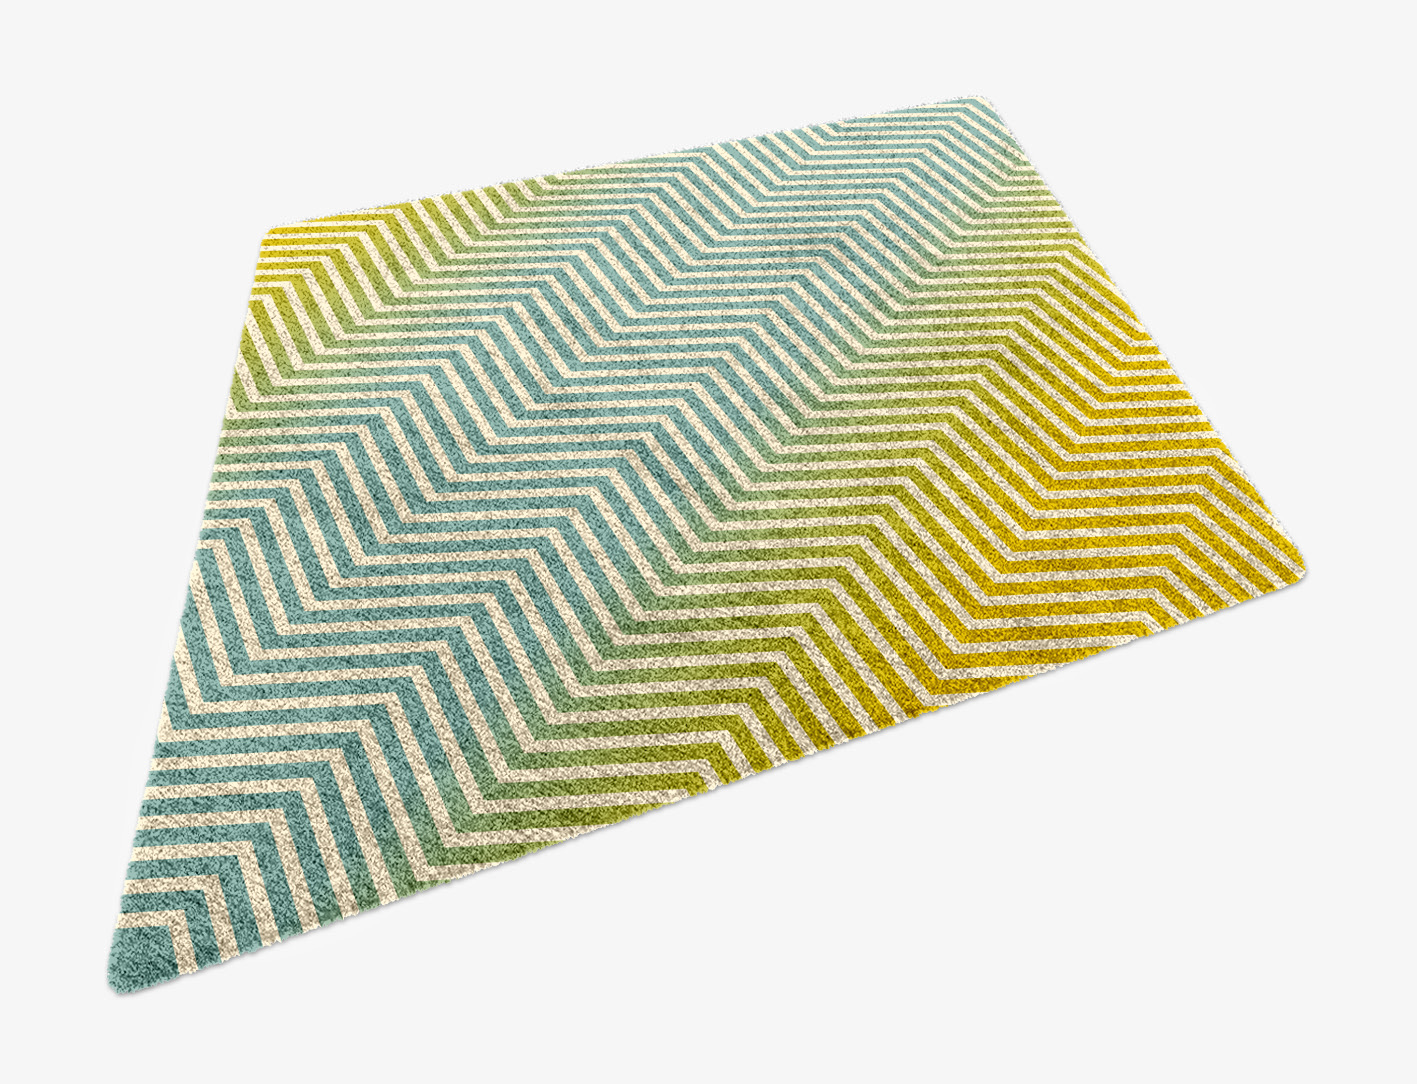 Zigzag Ombre Diamond Hand Knotted Bamboo Silk Custom Rug by Rug Artisan